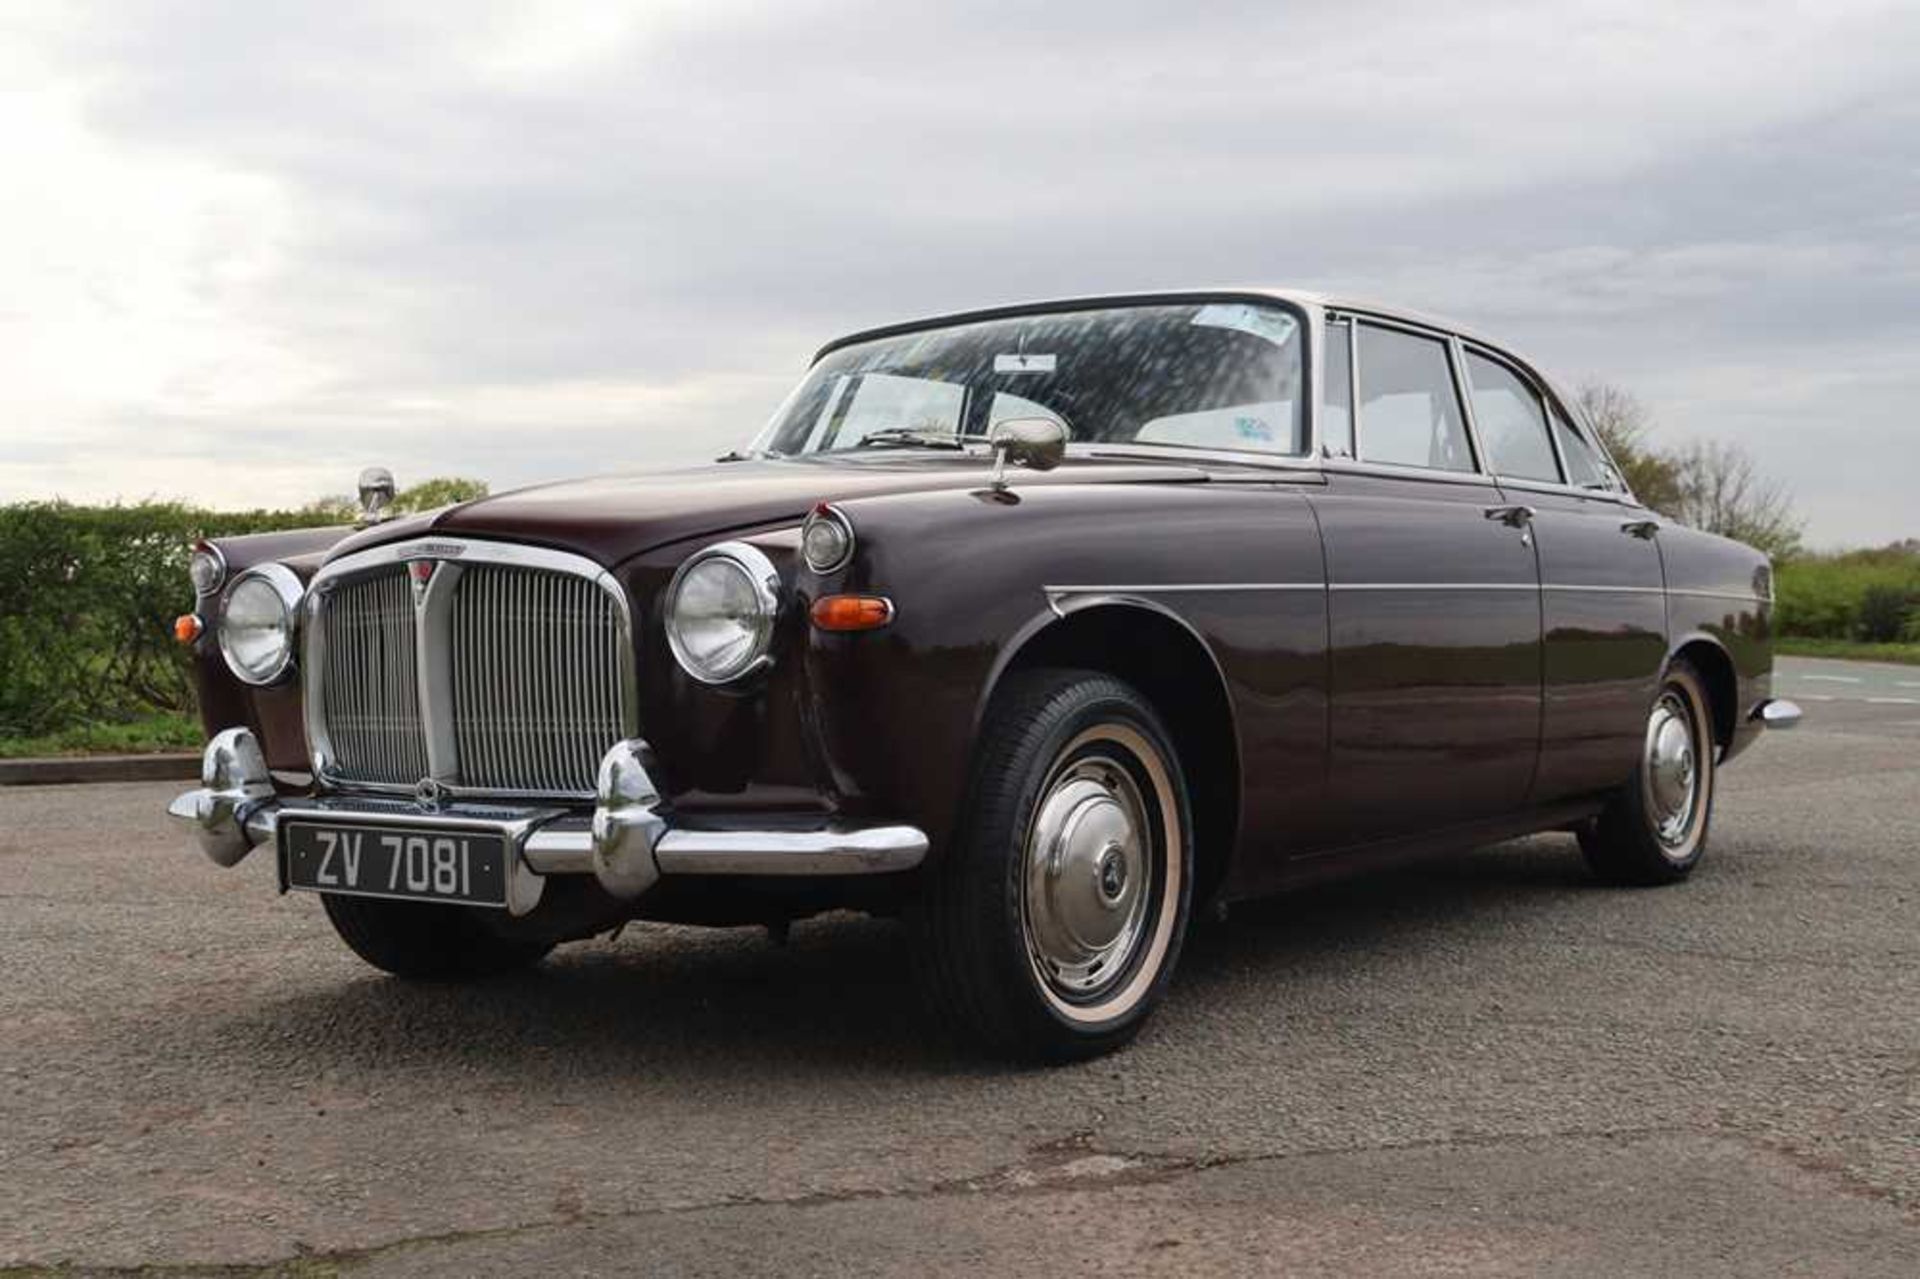 1964 Rover P5 3-Litre Coupe - Image 4 of 41